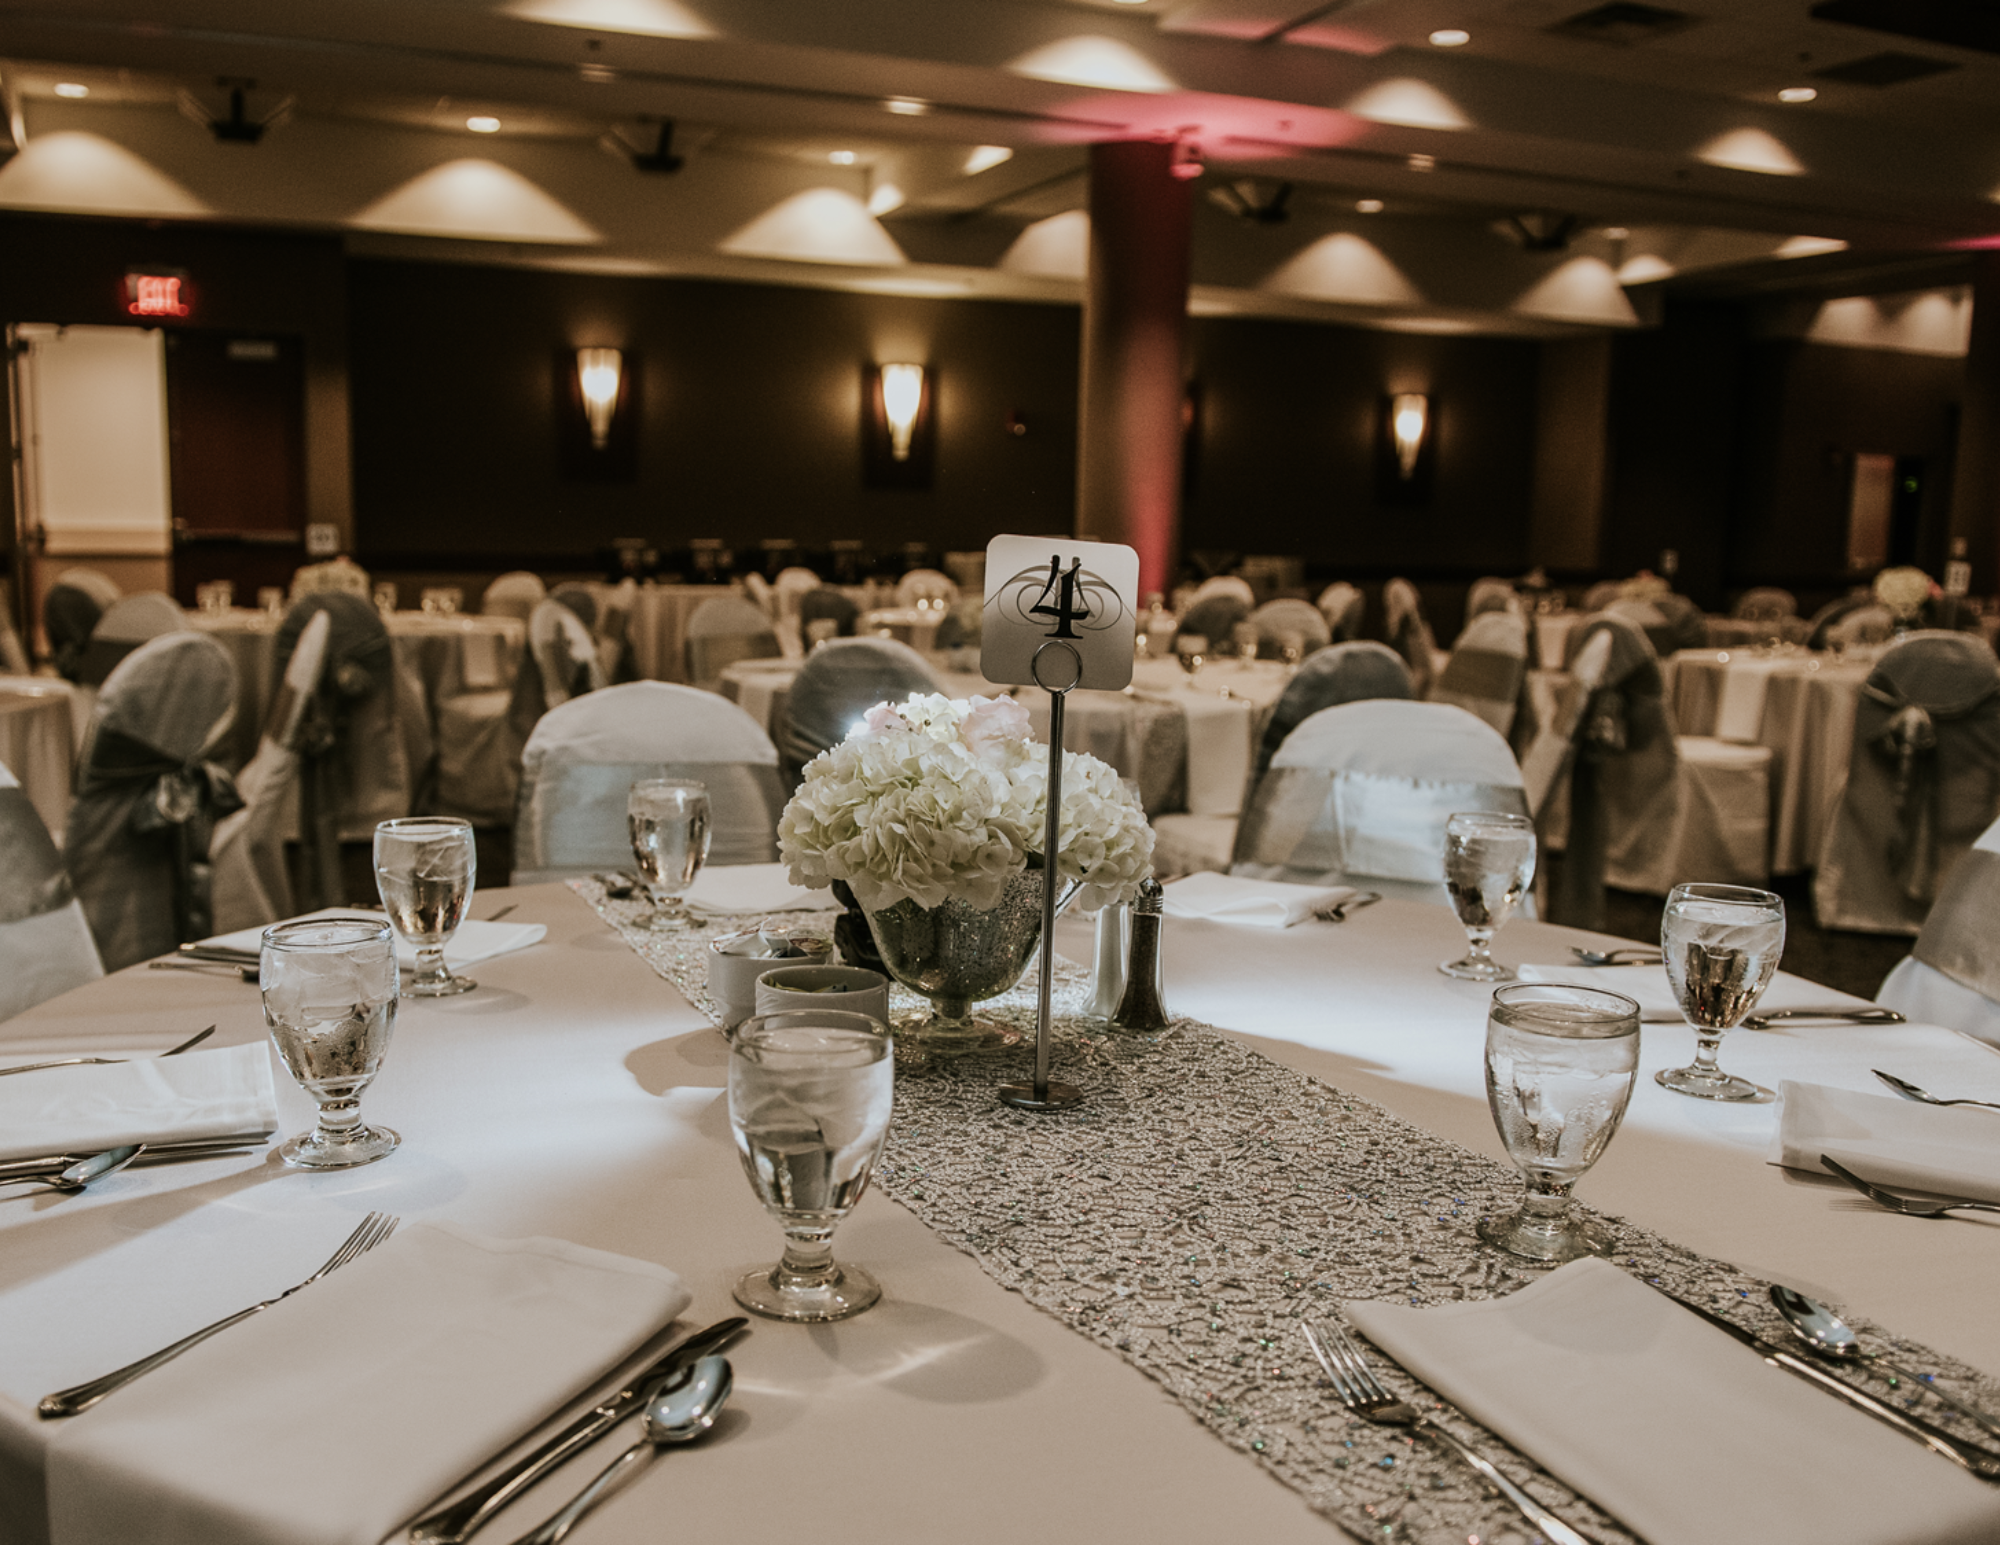 Banquet room with silver decorations and chair covers